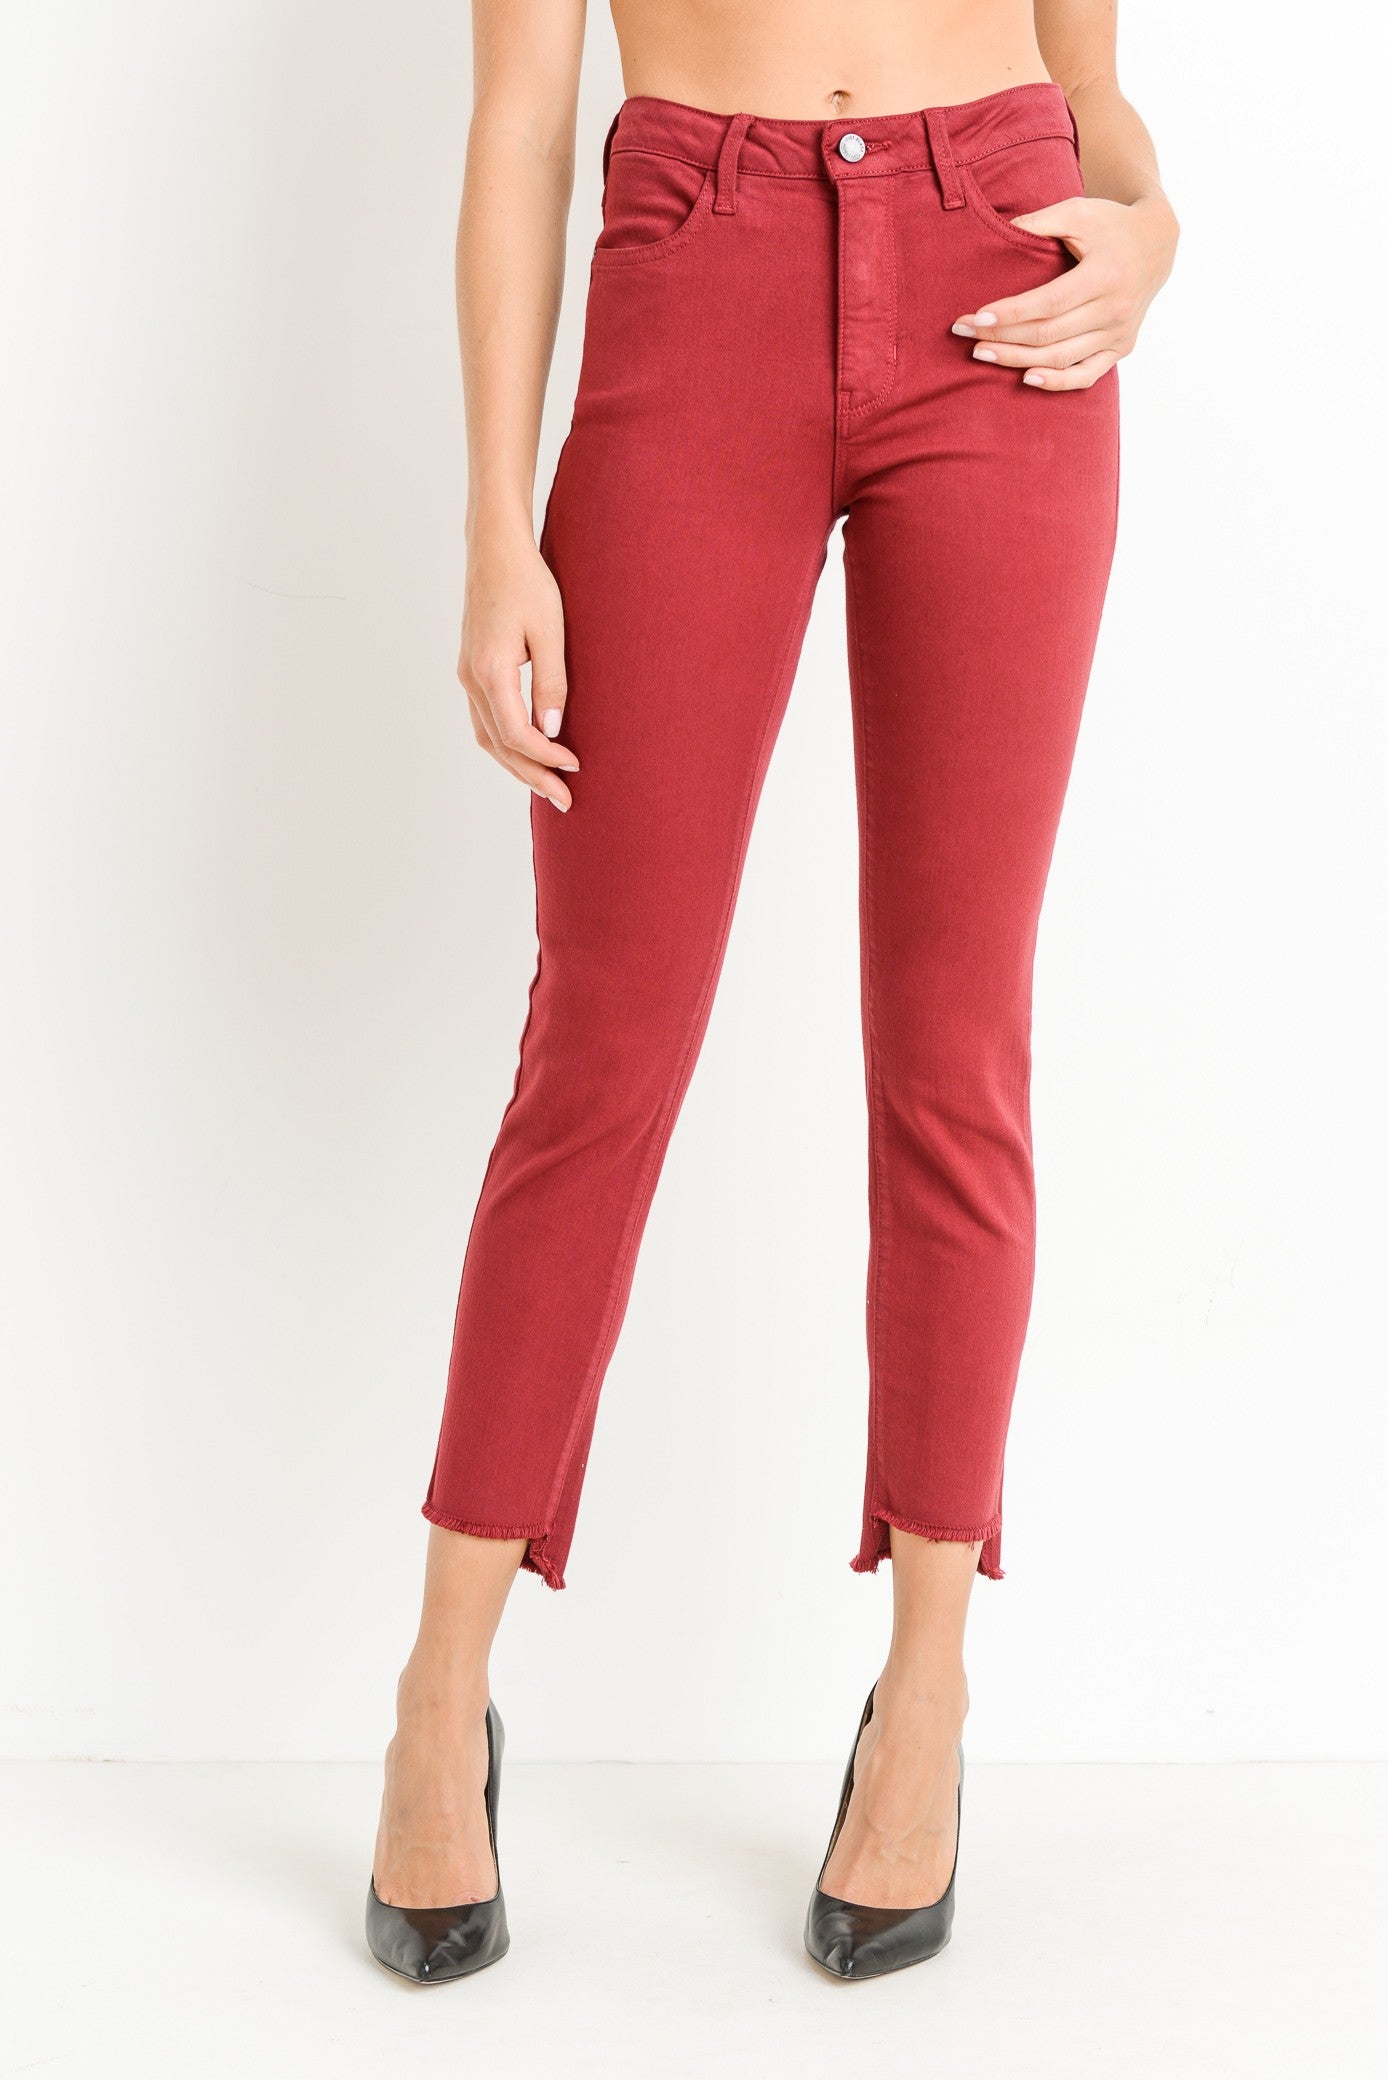 Ruby Red Jeans - Sz 25 Left!